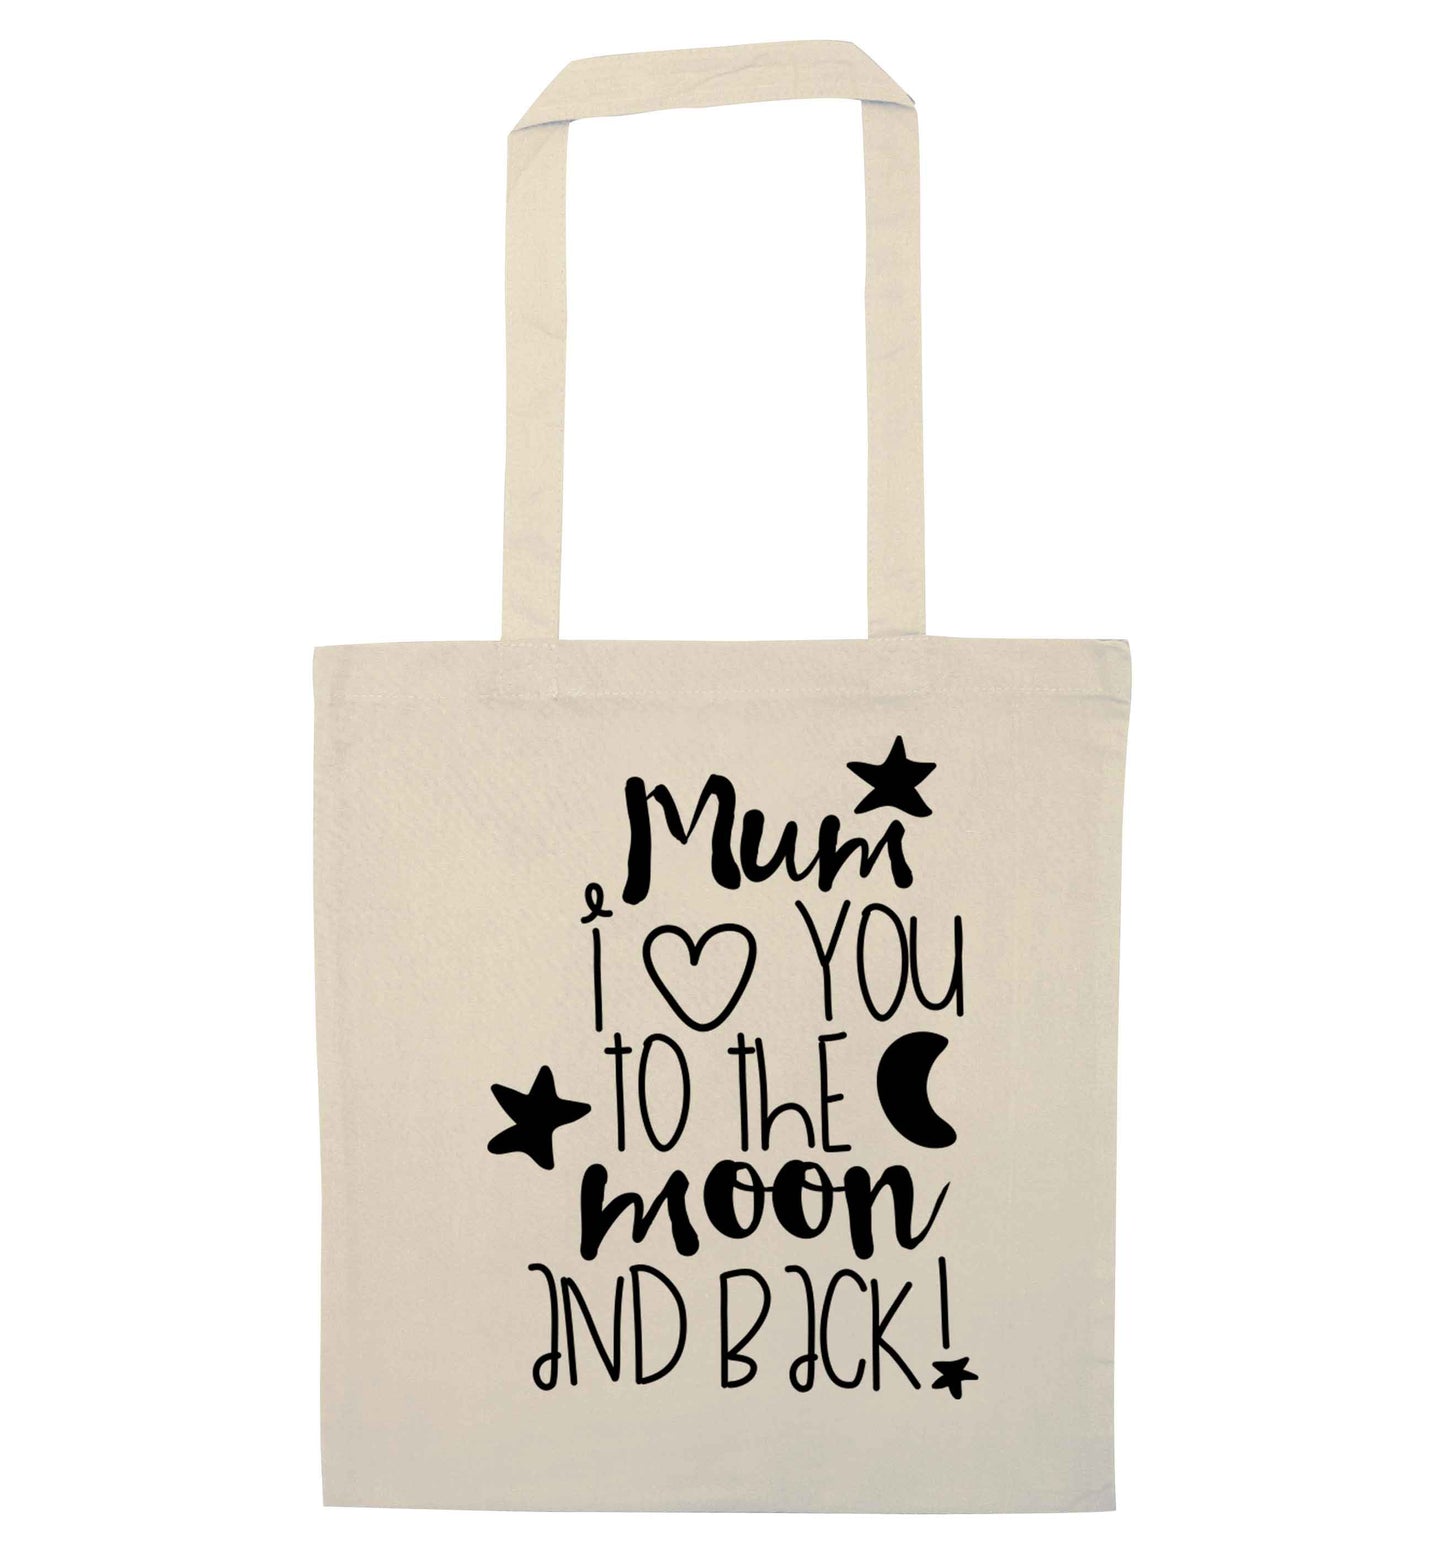 Mum I love you to the moon and back natural tote bag